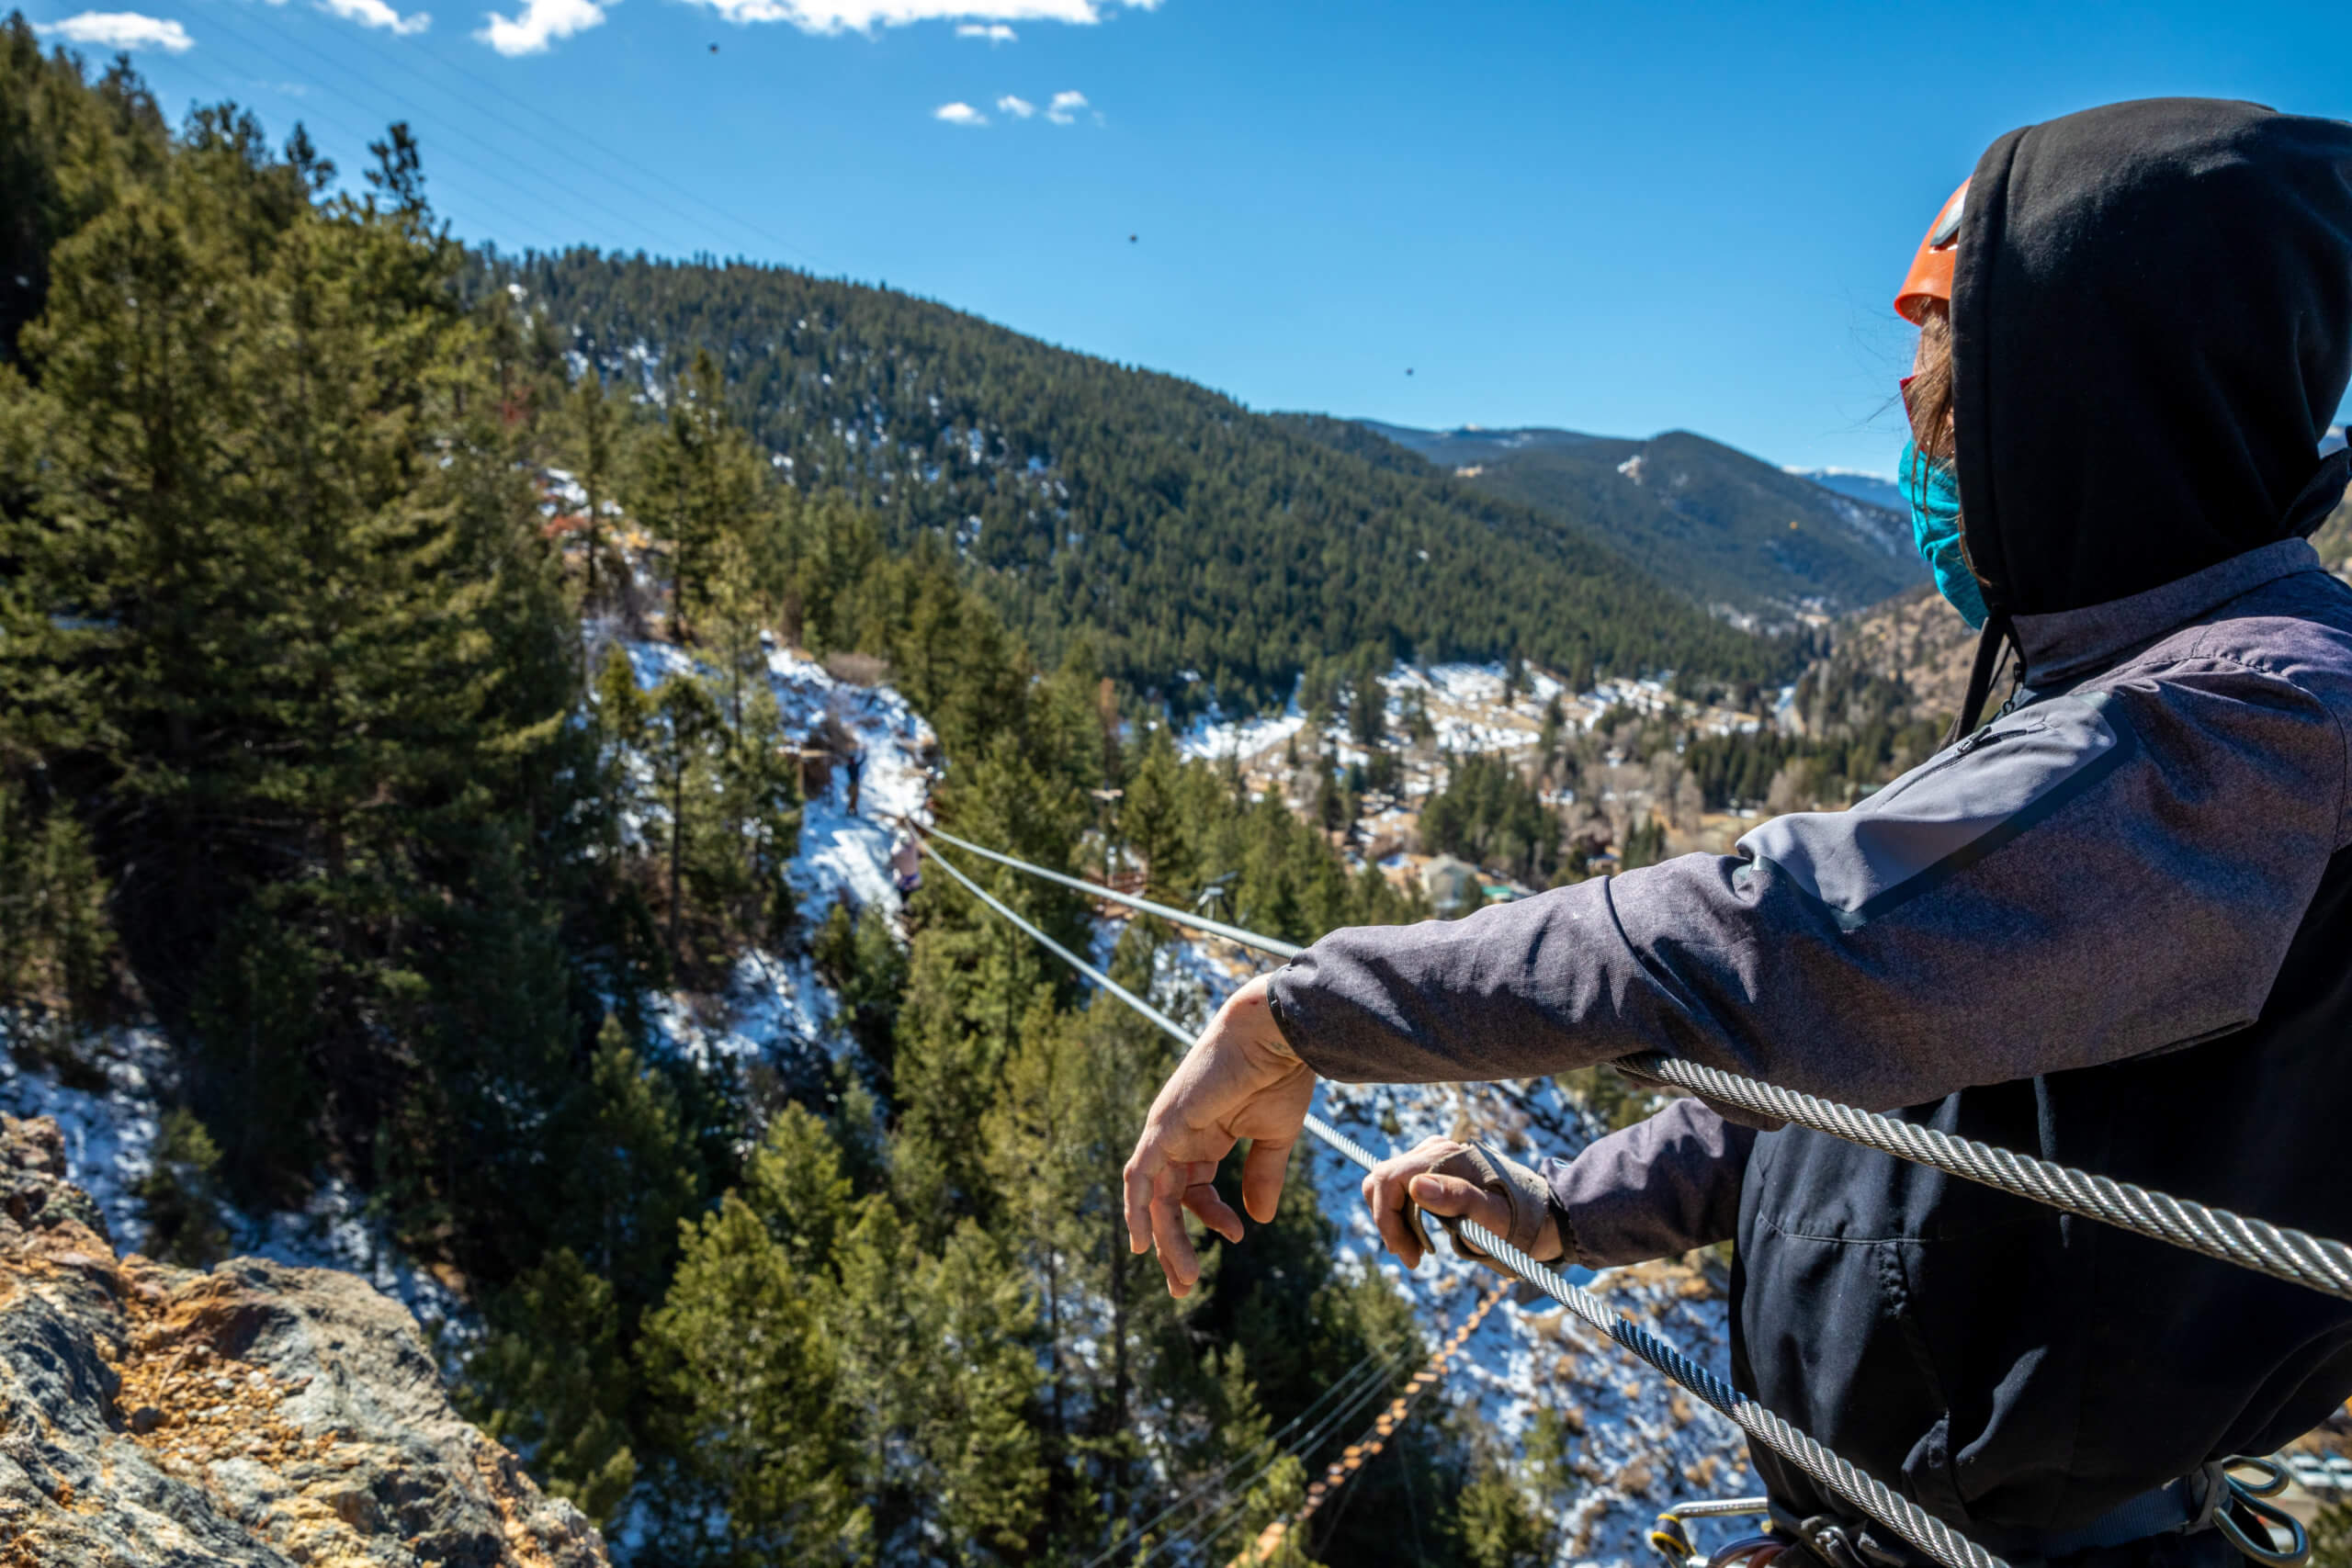 A guide looking down a zipline with a snowy mountain in the background